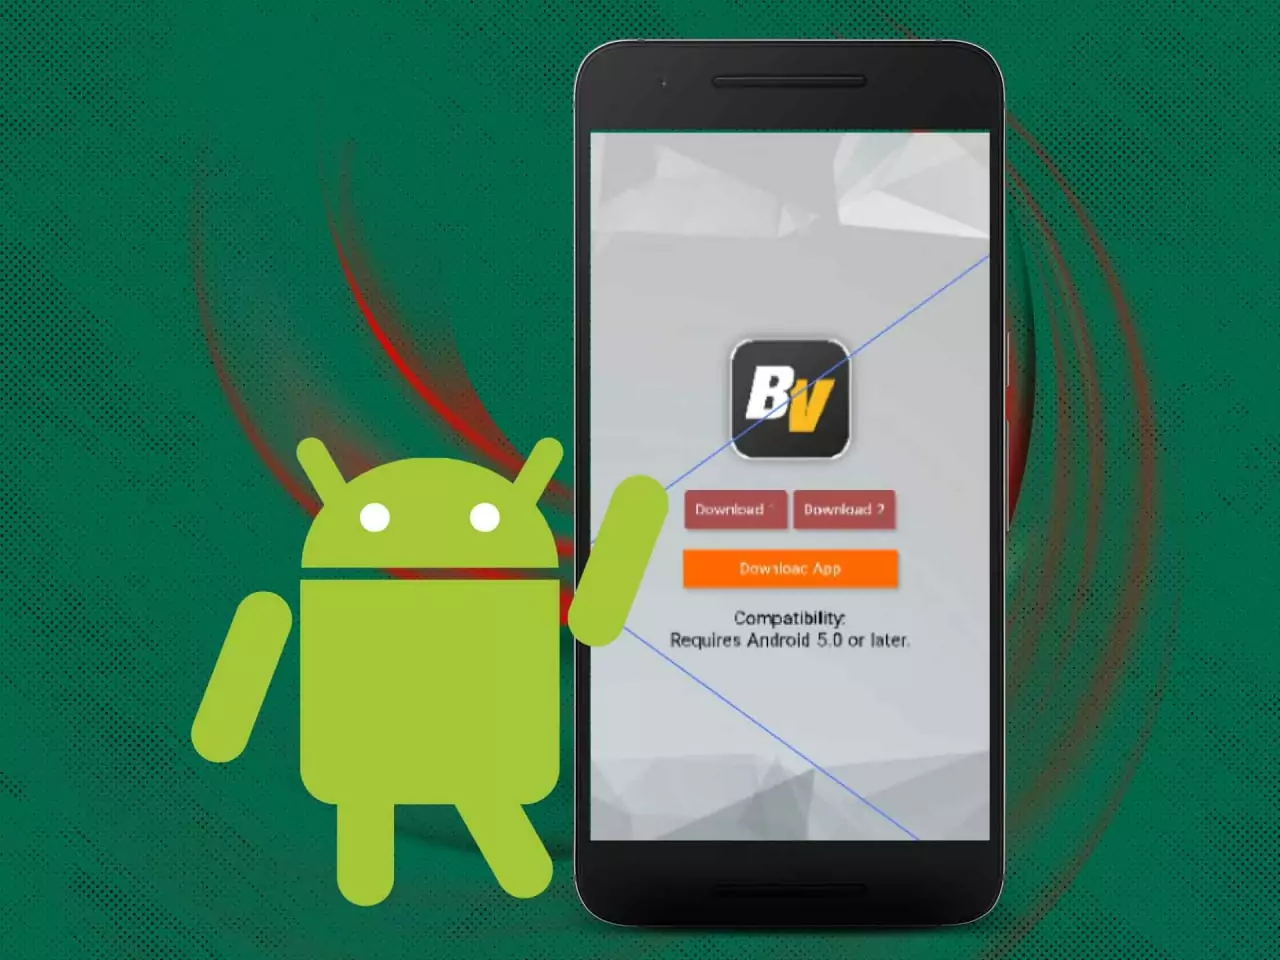 Almost every modern Android device can download the Betvisa app.